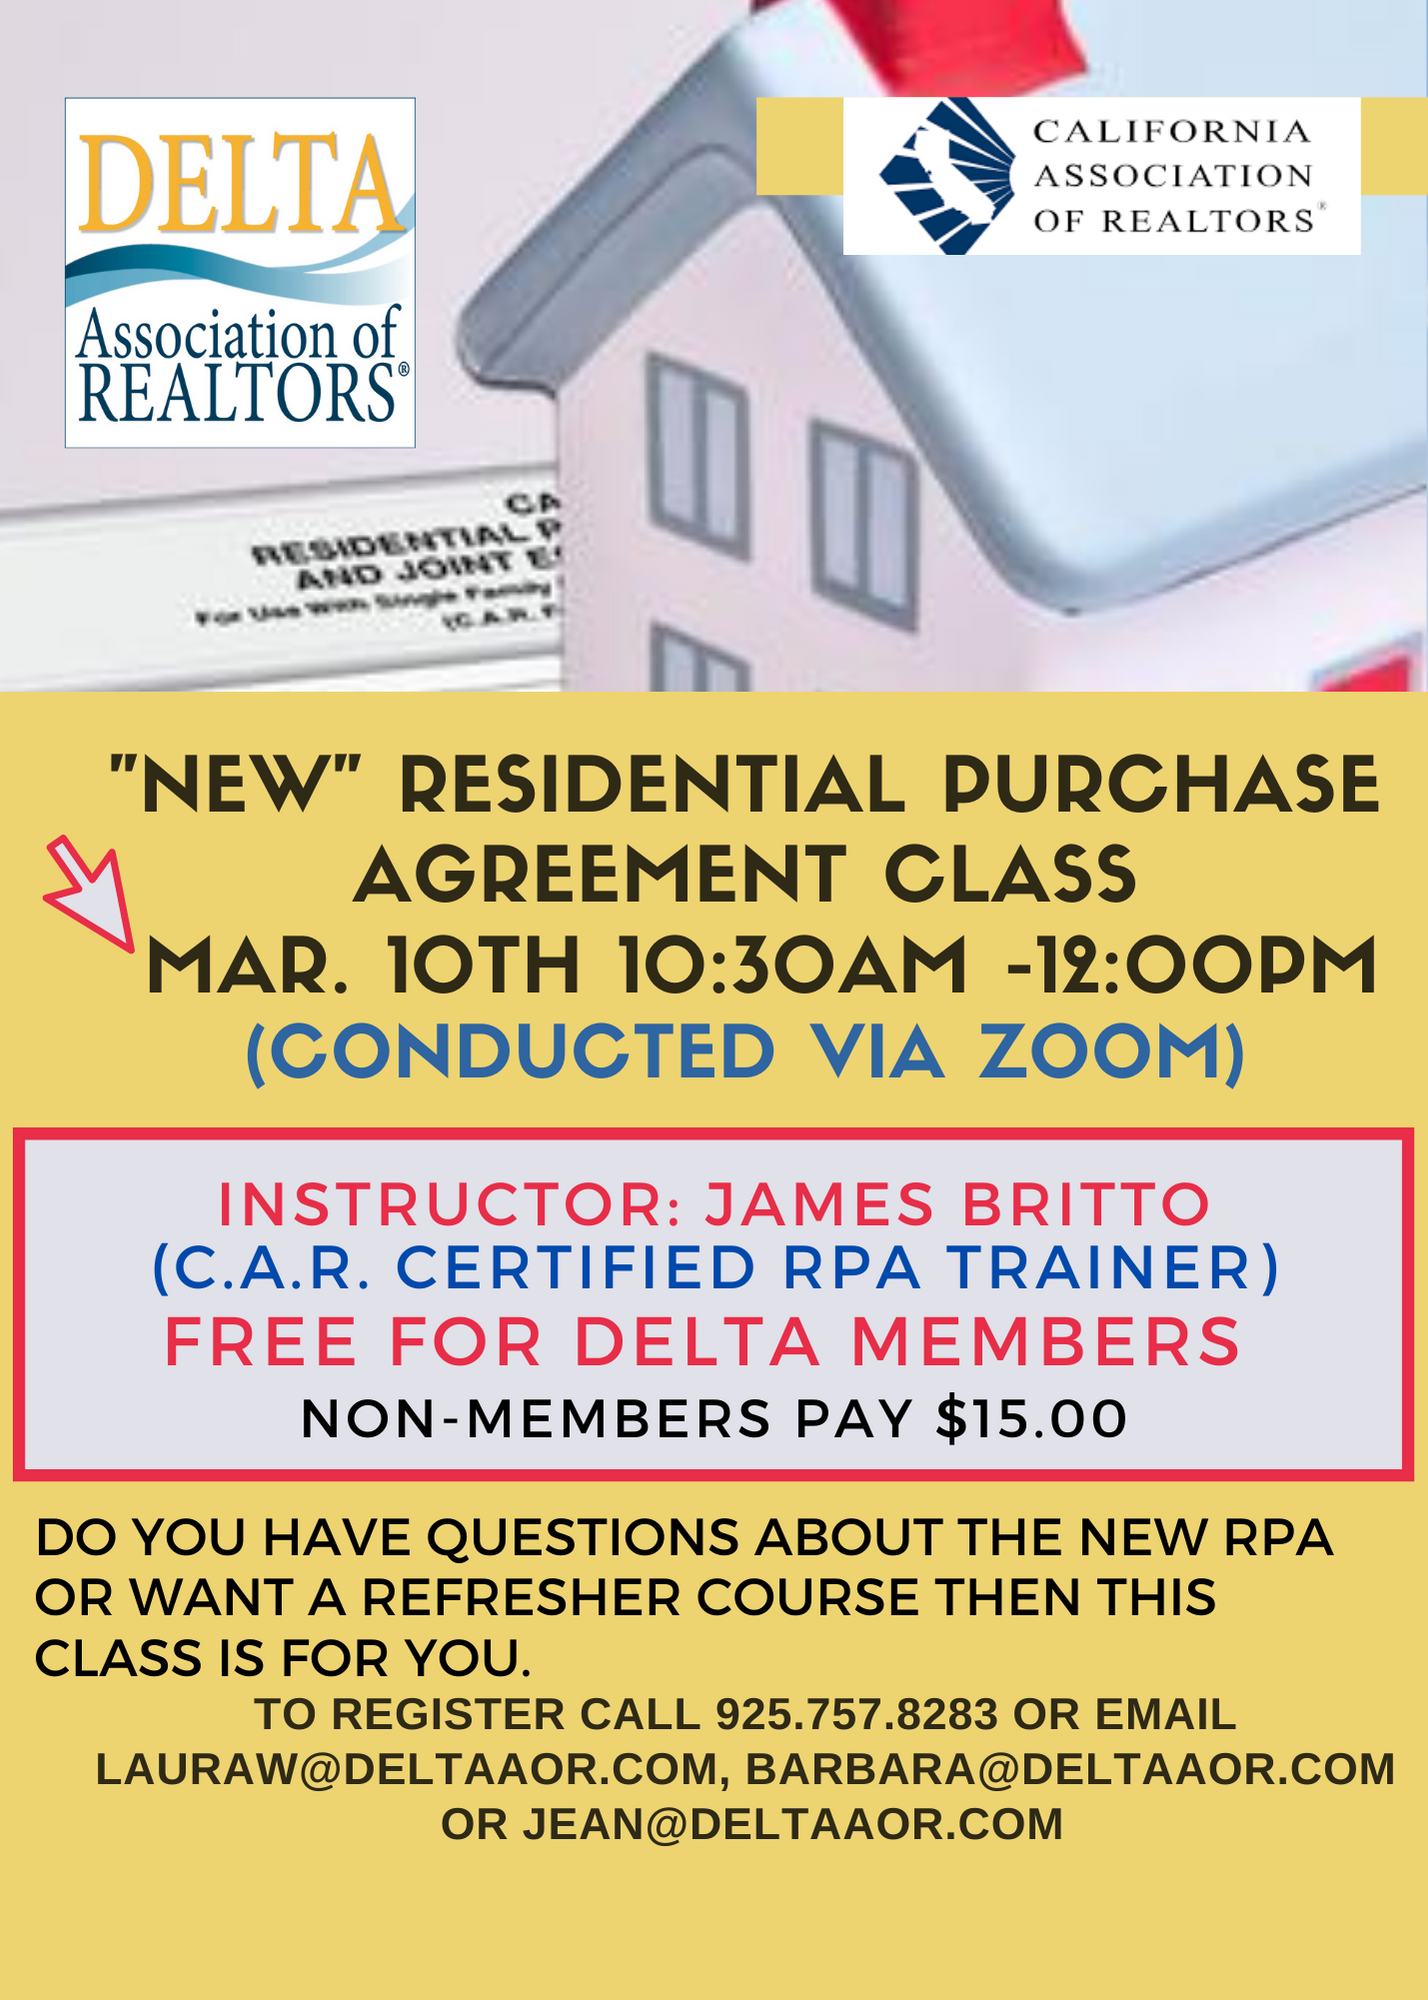 Flyer for NEW Residential Purchase Agreement class on Thursday, March 10th at 10:30 am via Zoom.